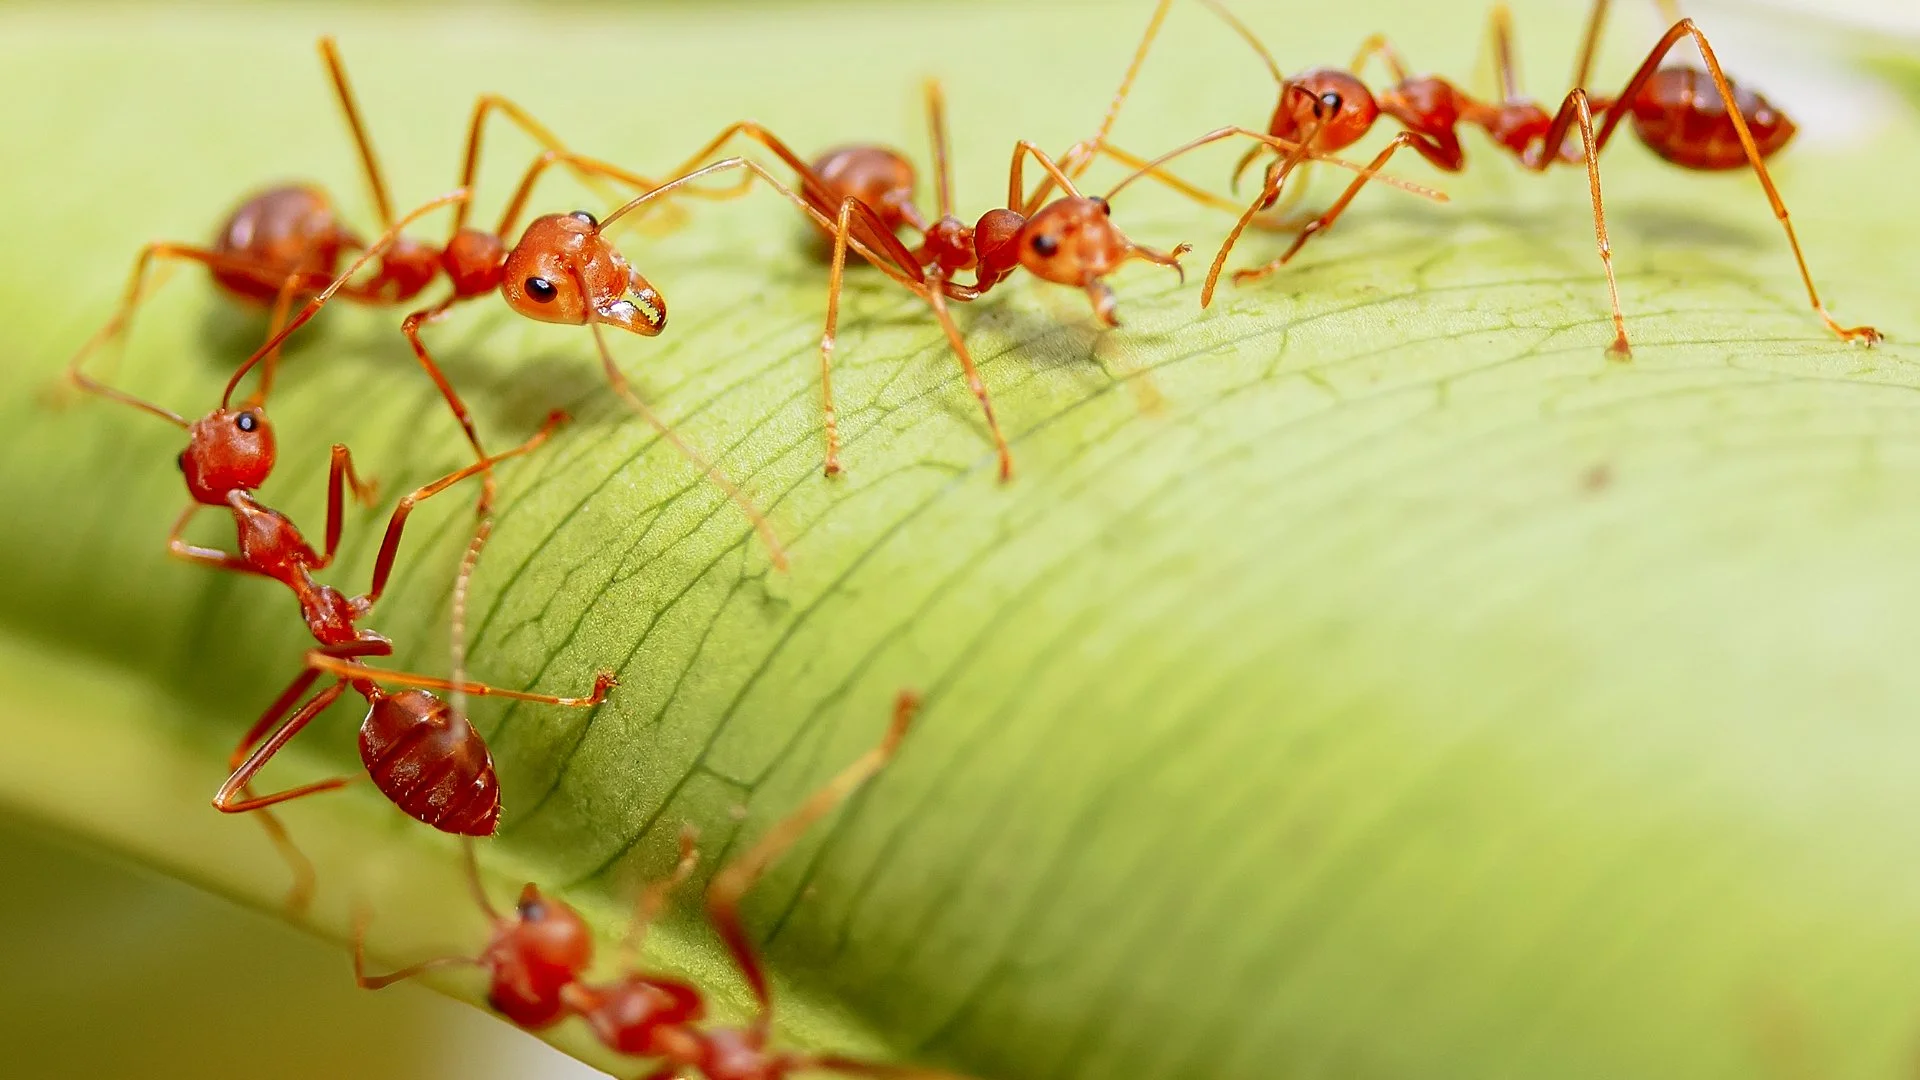 3 Signs That Indicate the Ant Mounds in Your Lawn Are Fire Ant Mounds!